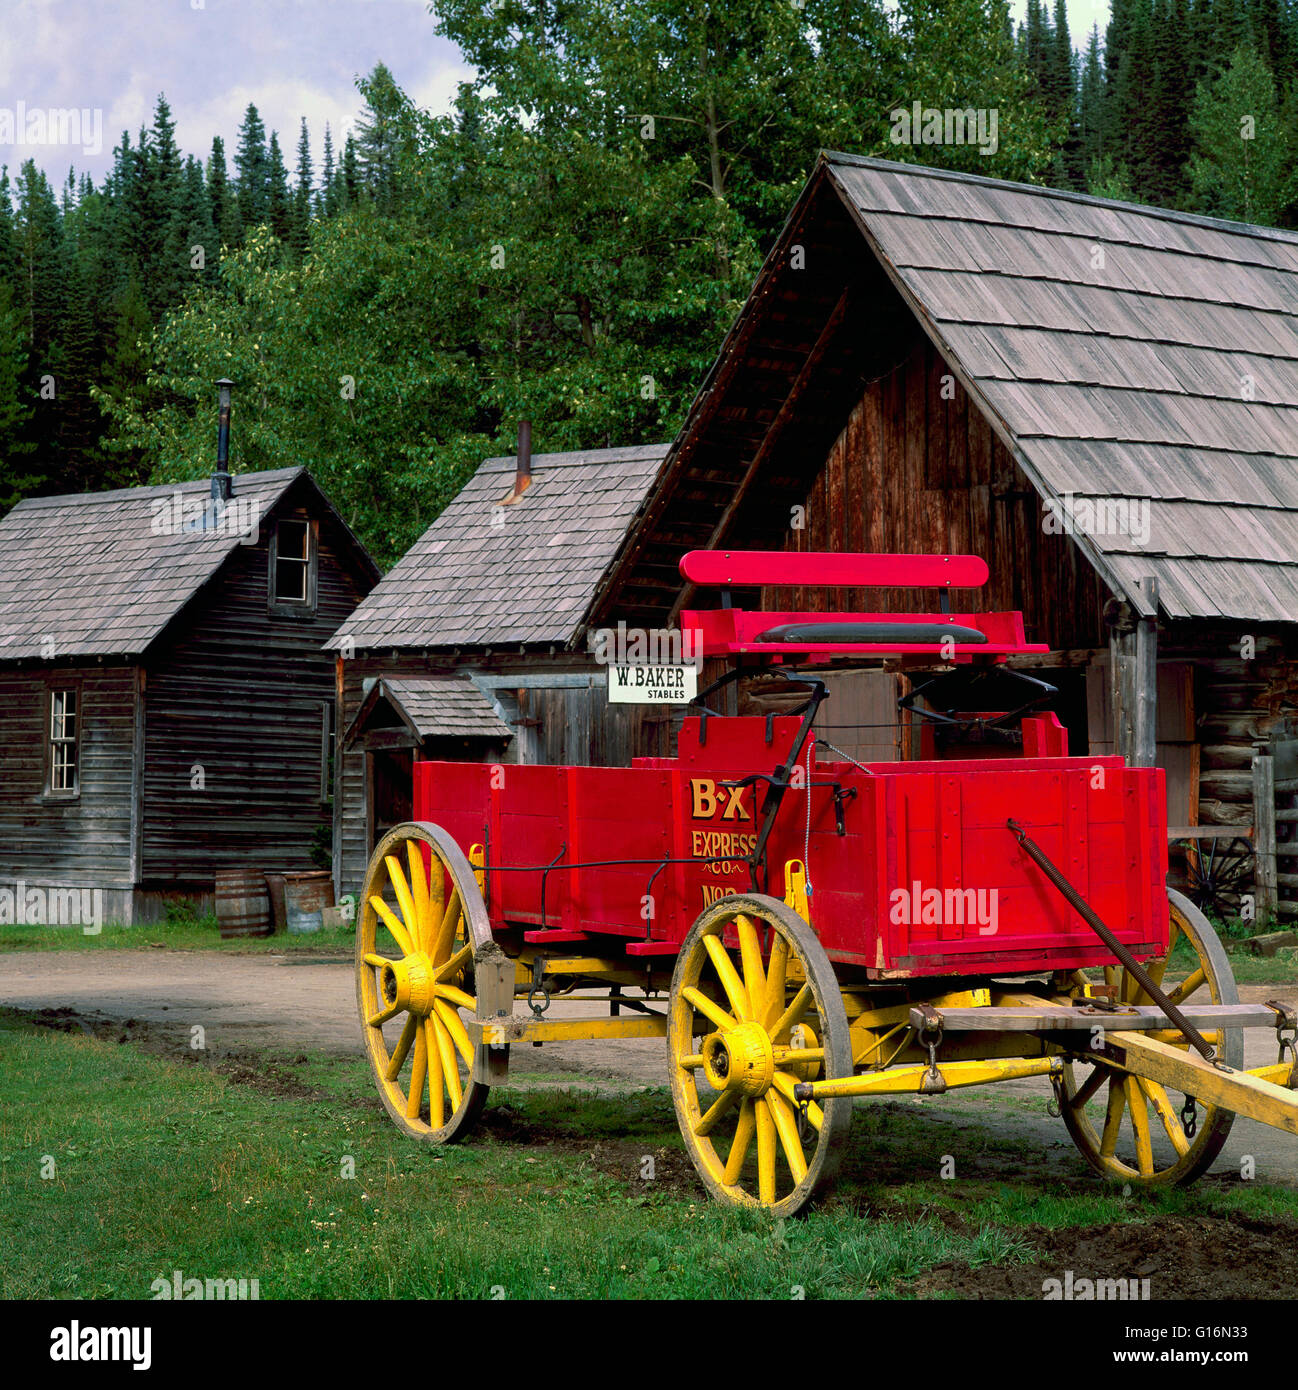 Barkerville, BC, British Columbia, Canada - BX (Barnard's Express) Pioneer Stagecoach in Historic Gold Rush Town, Cariboo Region Stock Photo